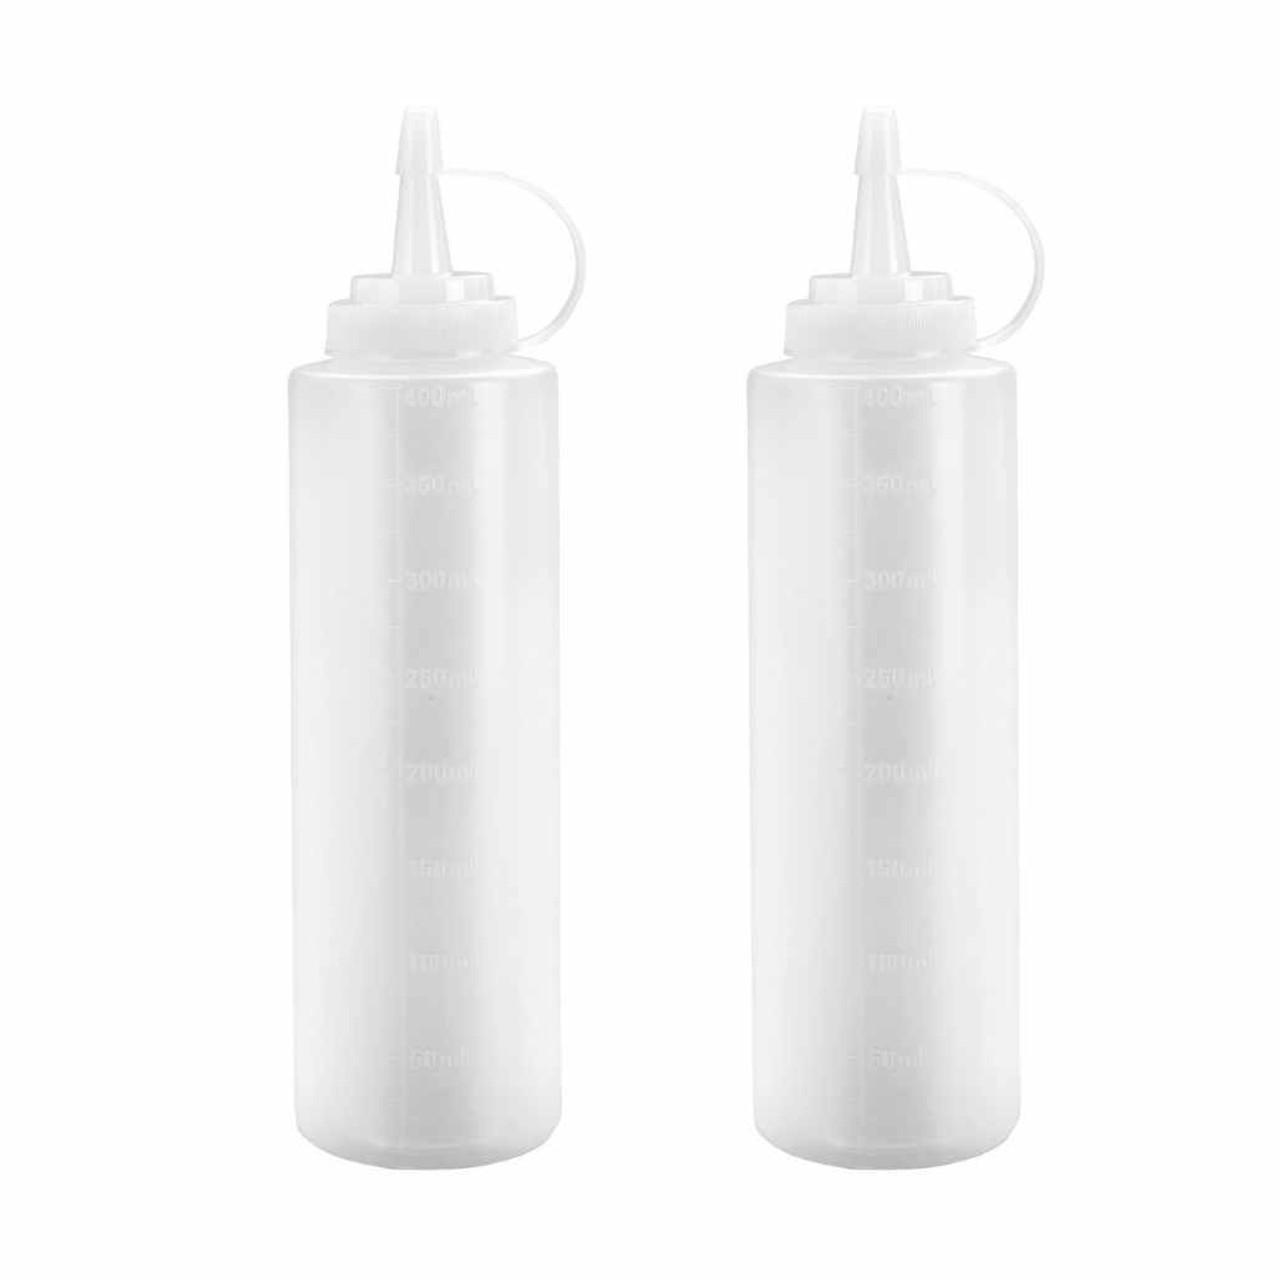 https://cdn11.bigcommerce.com/s-6yfyhv23lh/images/stencil/1280x1280/products/551/2026/ibili-duo-of-squeeze-bottle__16138.1651960508.jpg?c=1